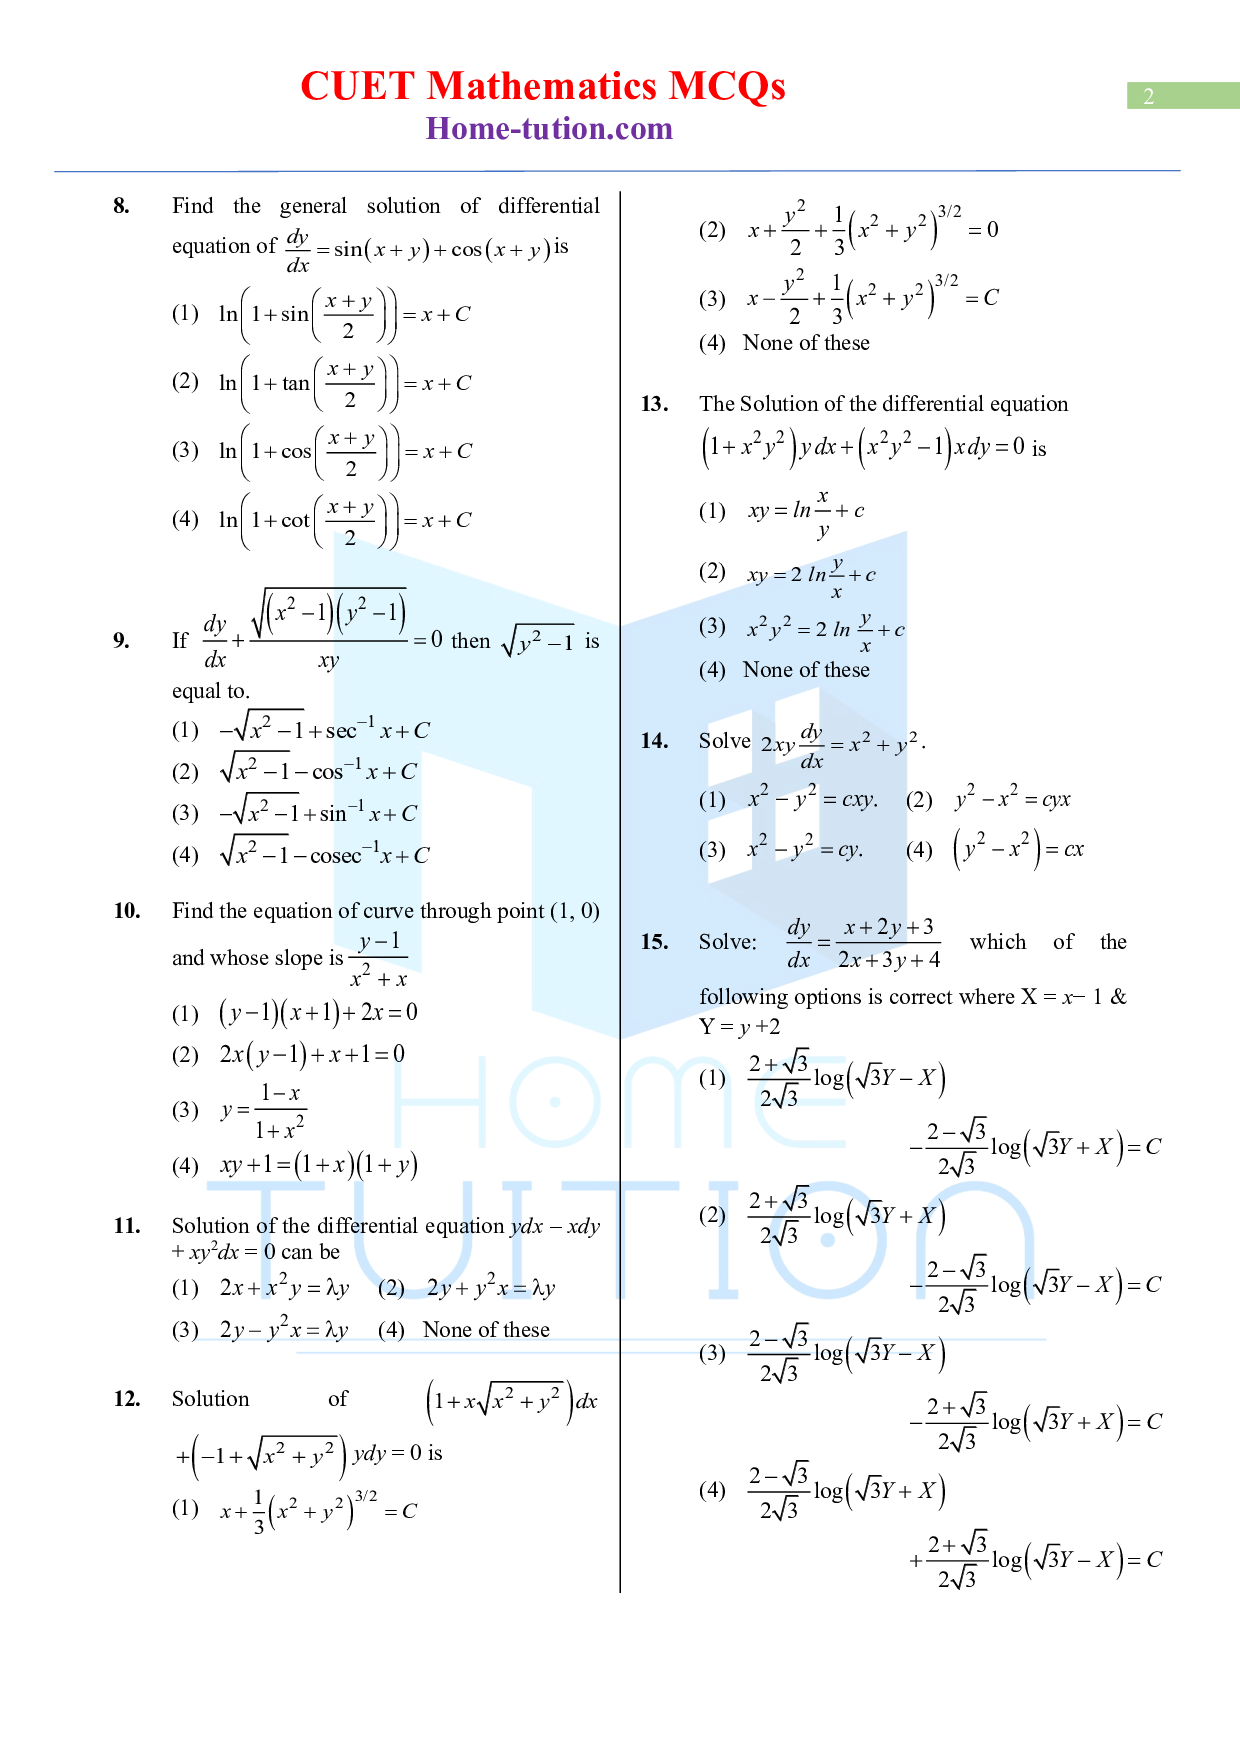 CUET MCQ Questions For Maths Chapter-5 Differential Equation